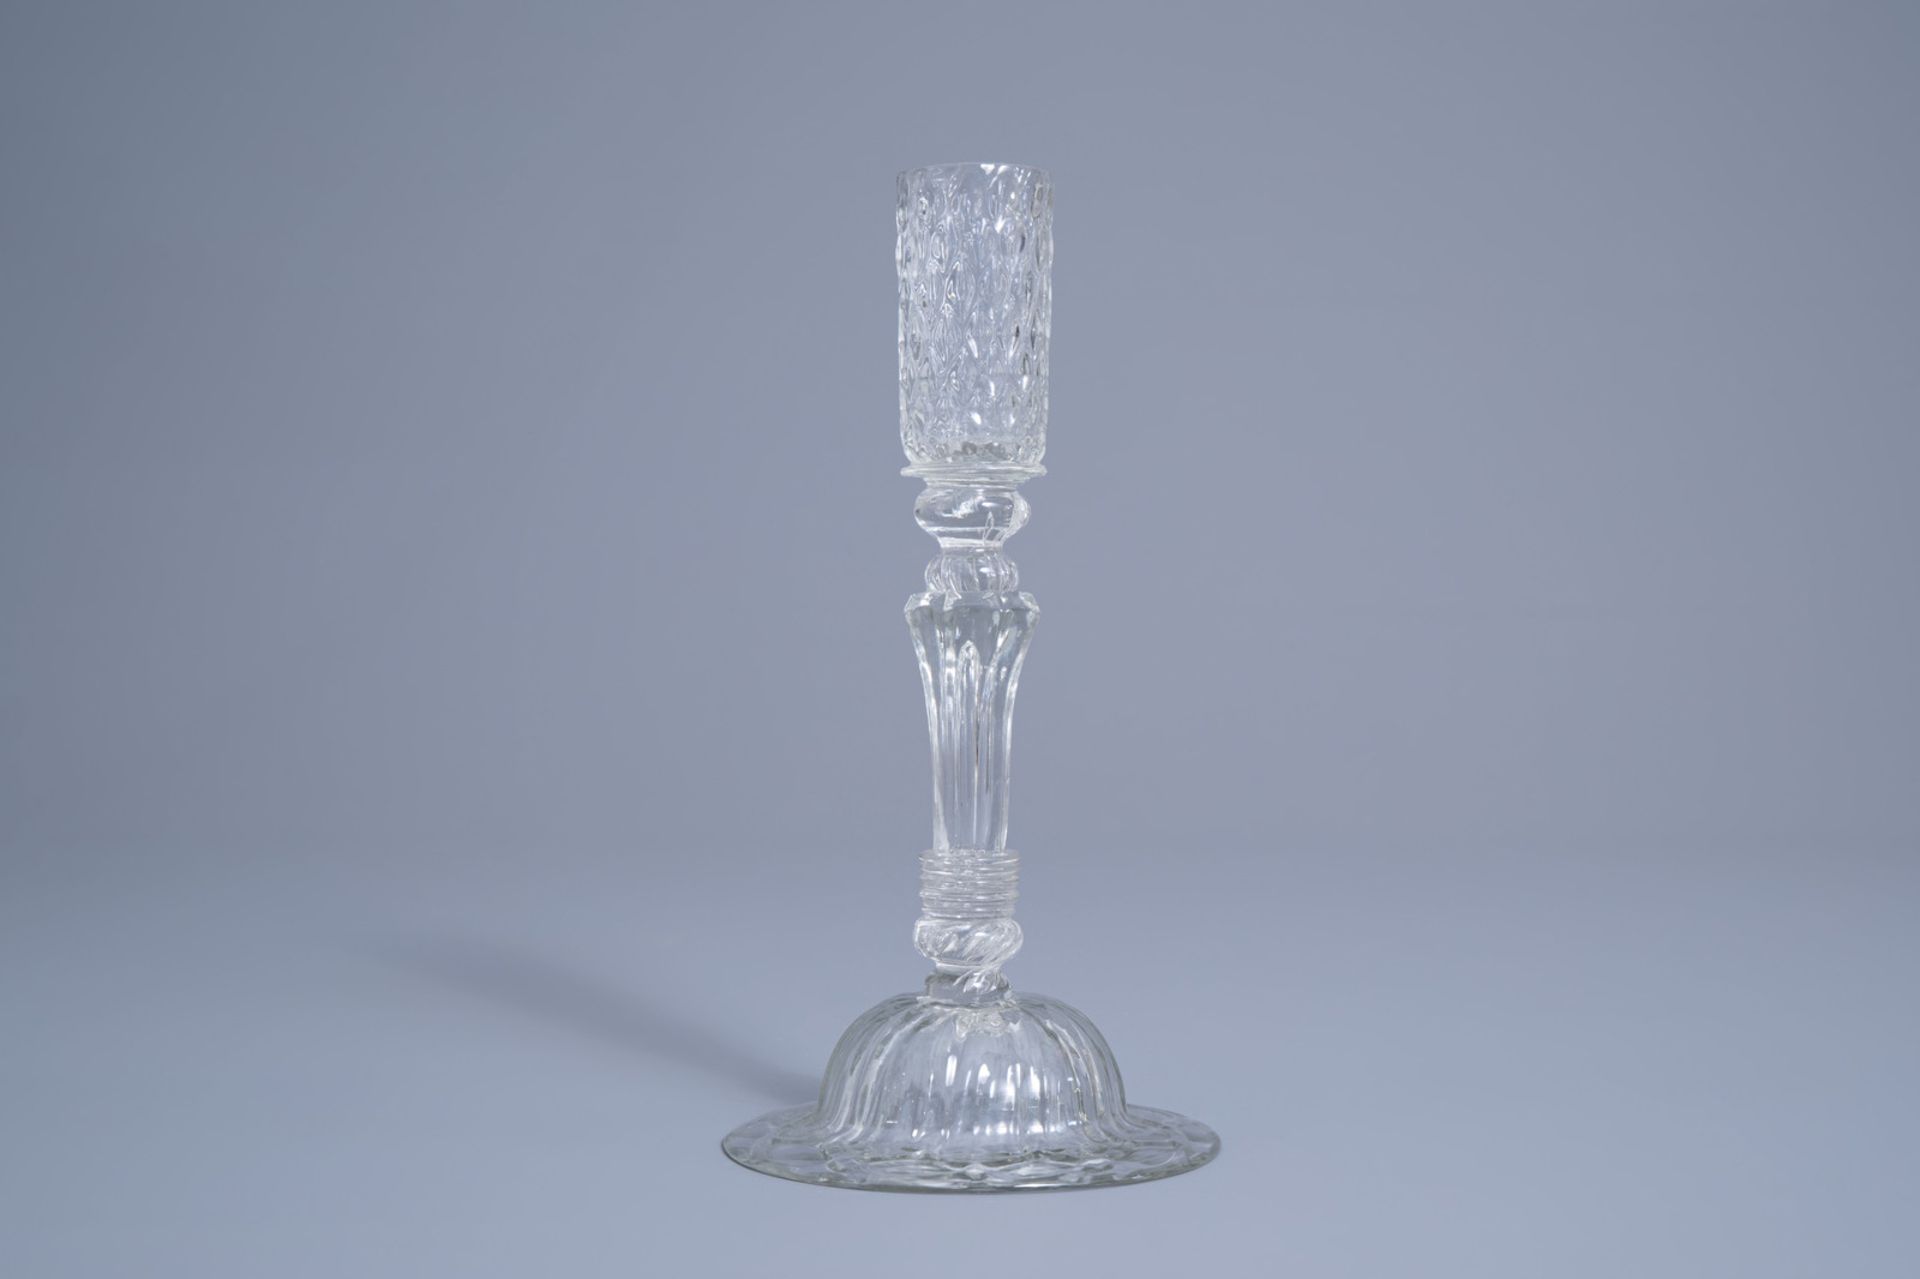 A mouth-blown glass candlestick with a moulded eight-sided pedestal stem, possibly Lige, 18th C. - Image 2 of 7